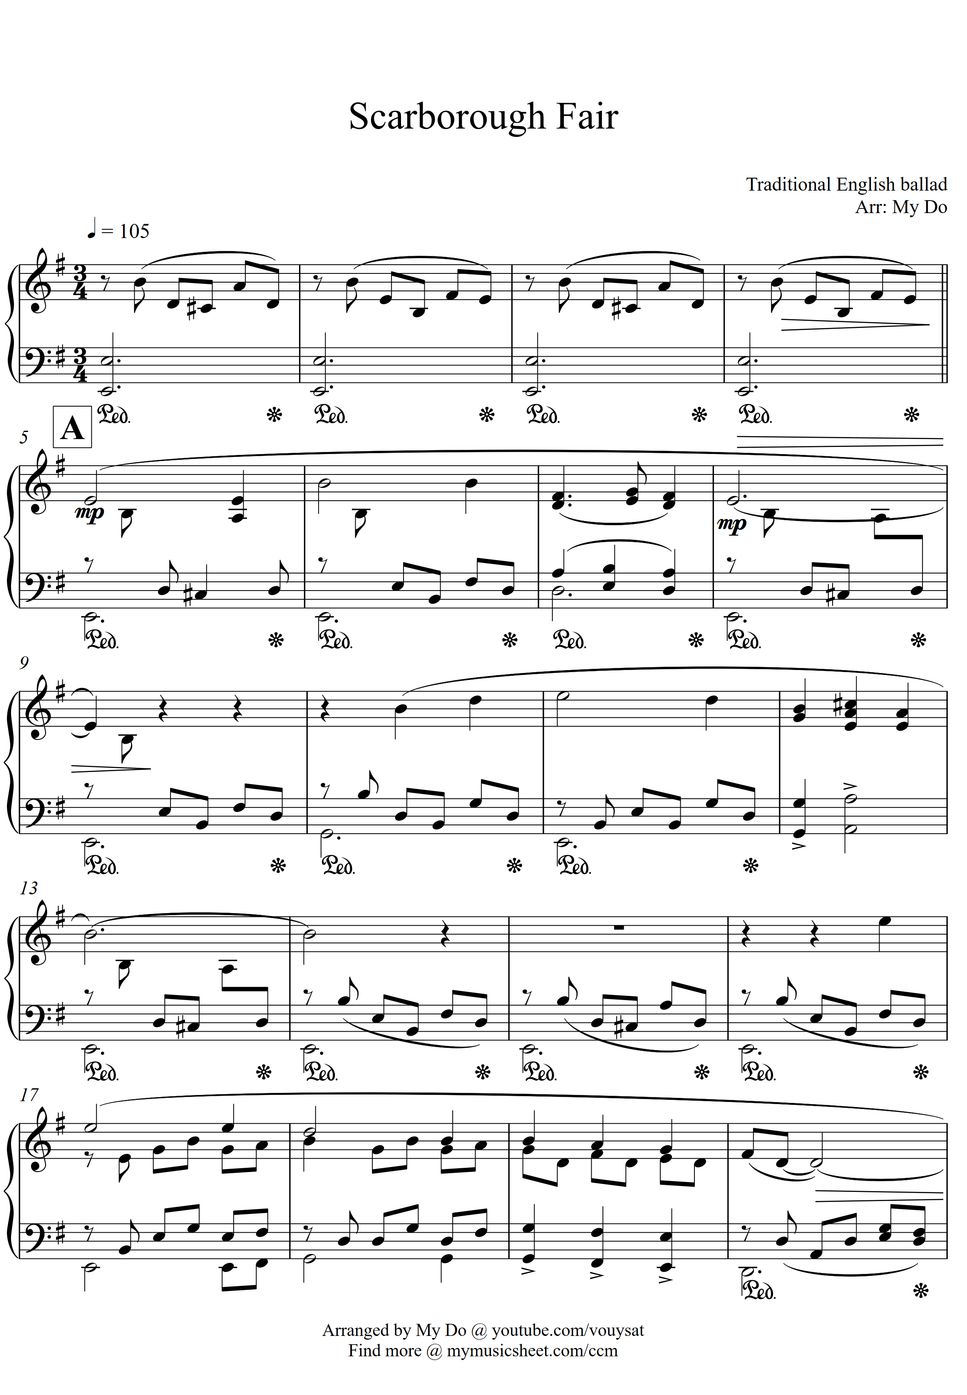 Scarborough Fair for Piano with sheet by My Do